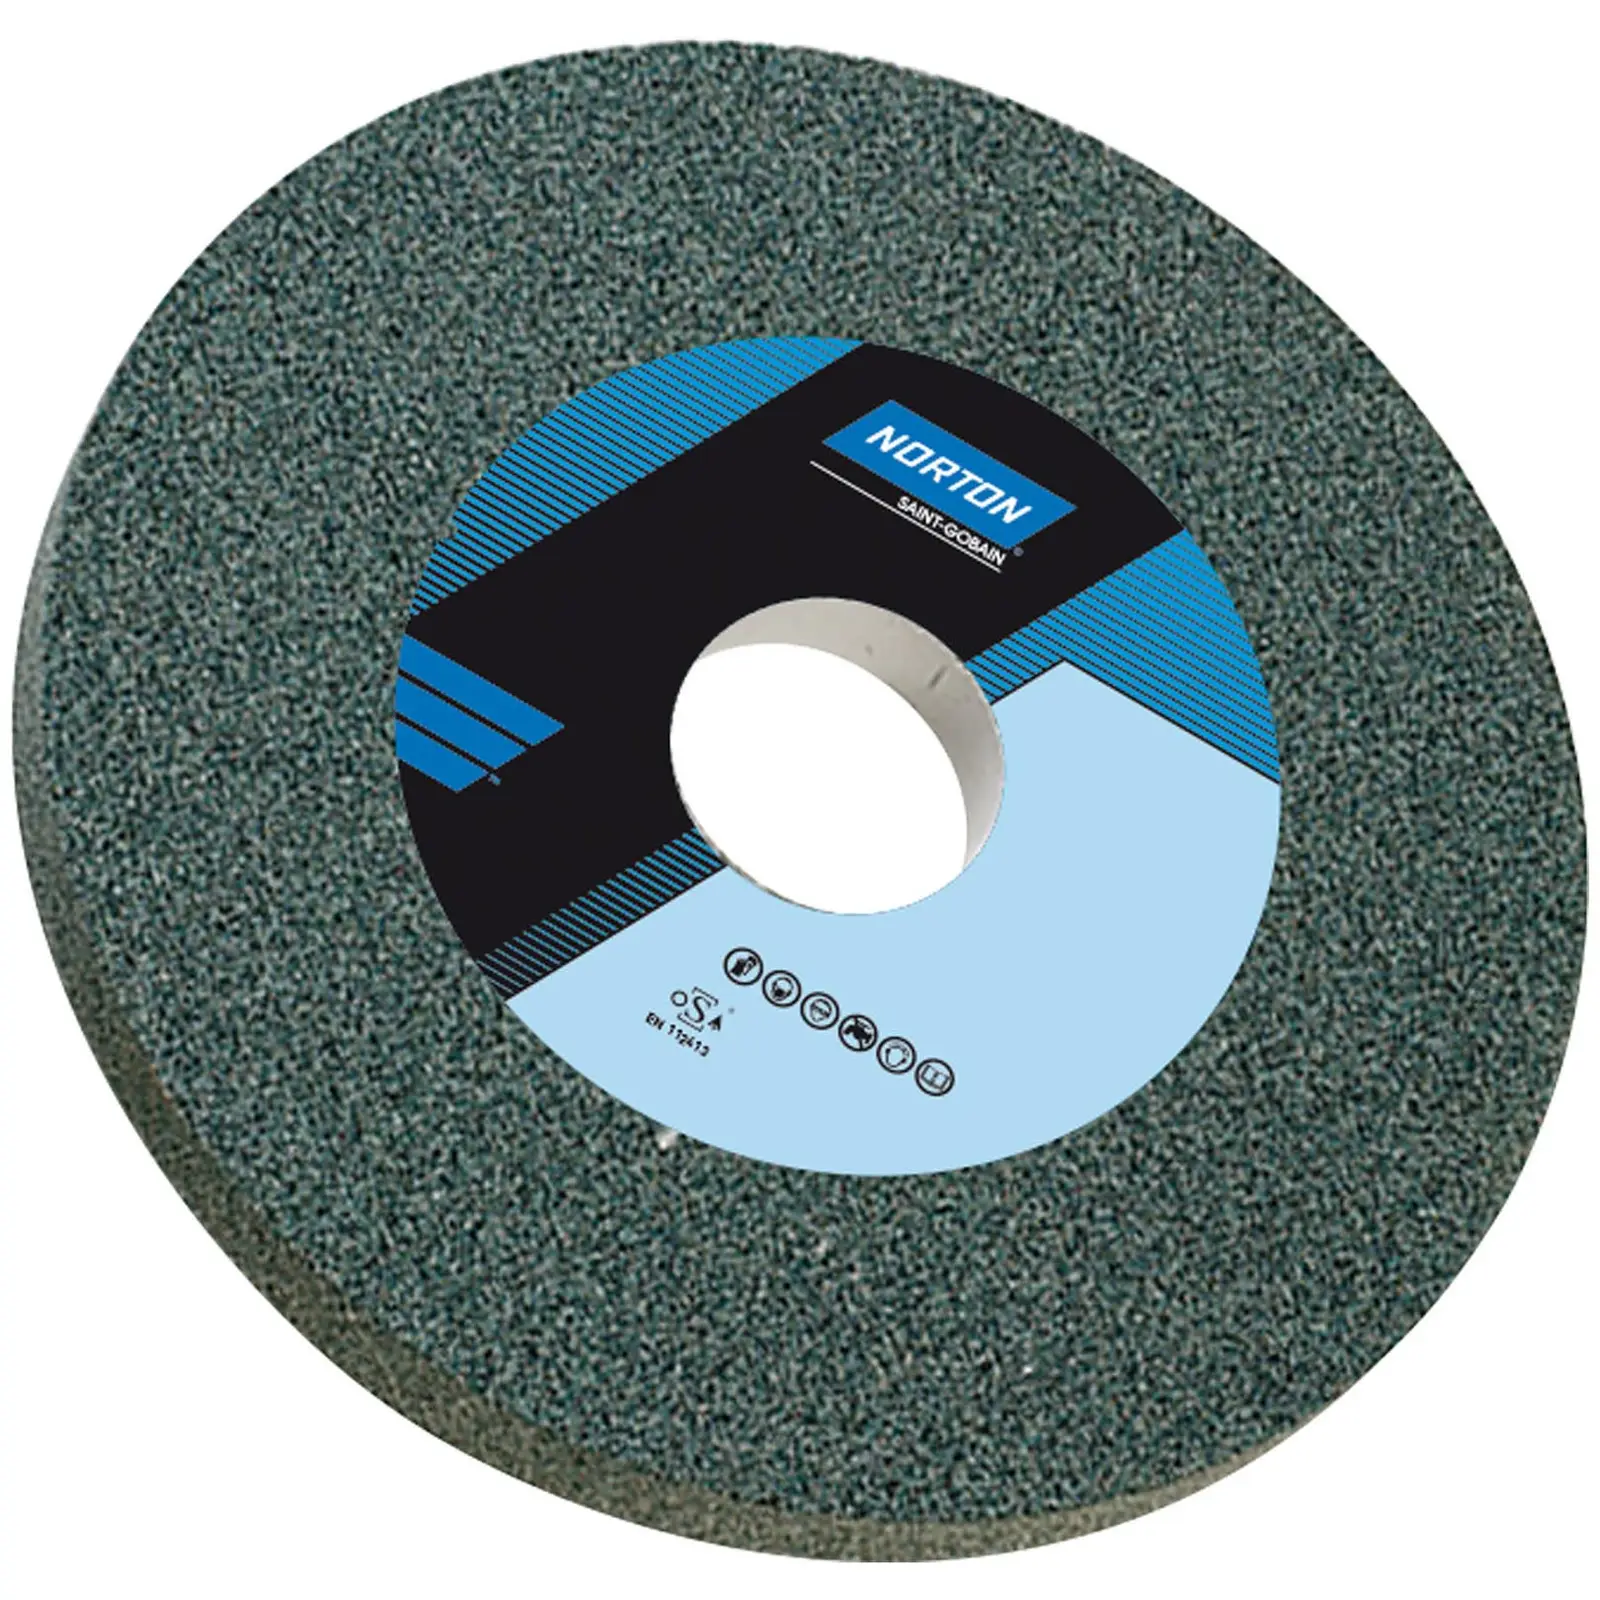 Grinding Wheel - Ø 200 mm - 36 grit - hardness grade K - silicon carbide (green) - 5 pieces